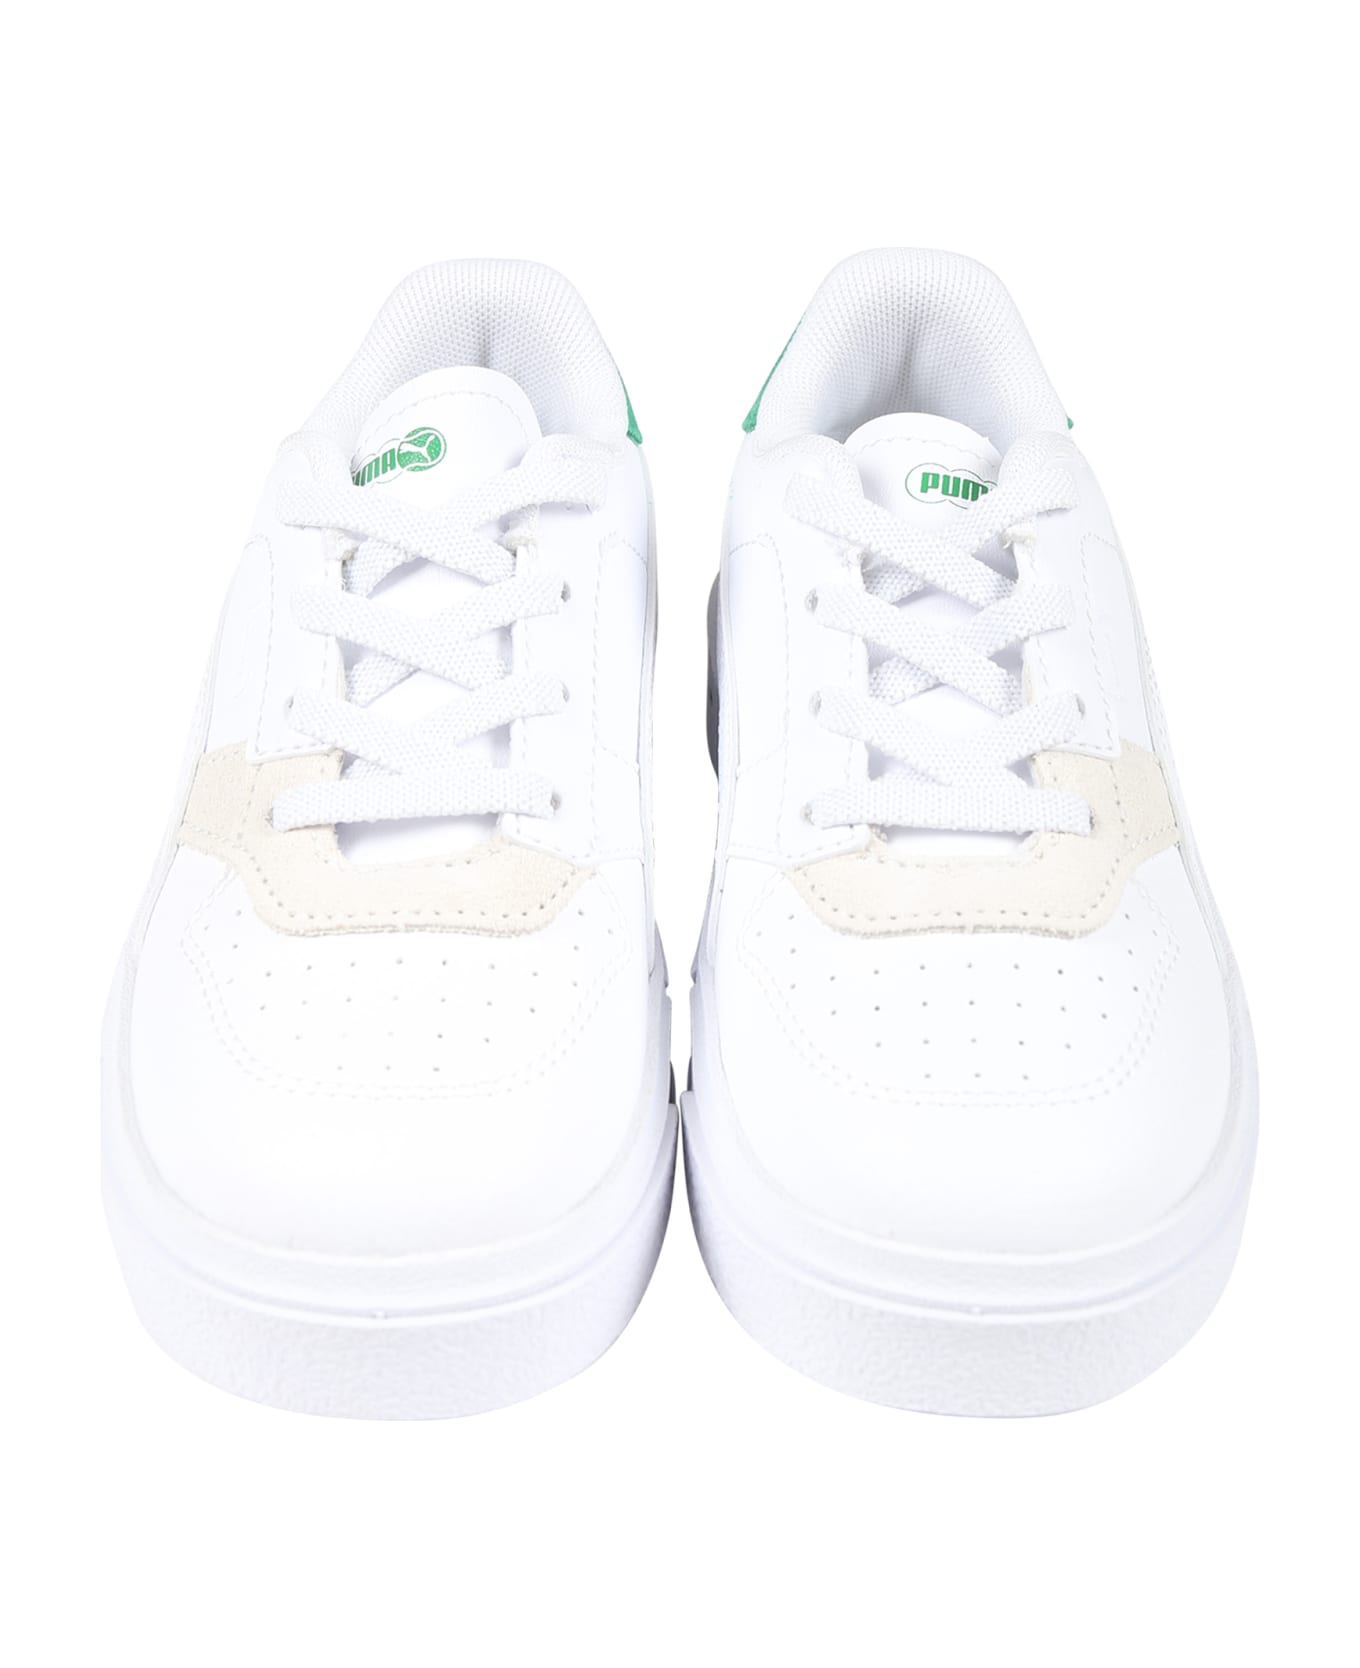 Puma White Cali Court Match Ps Sneakers For Kids With Logo - White シューズ